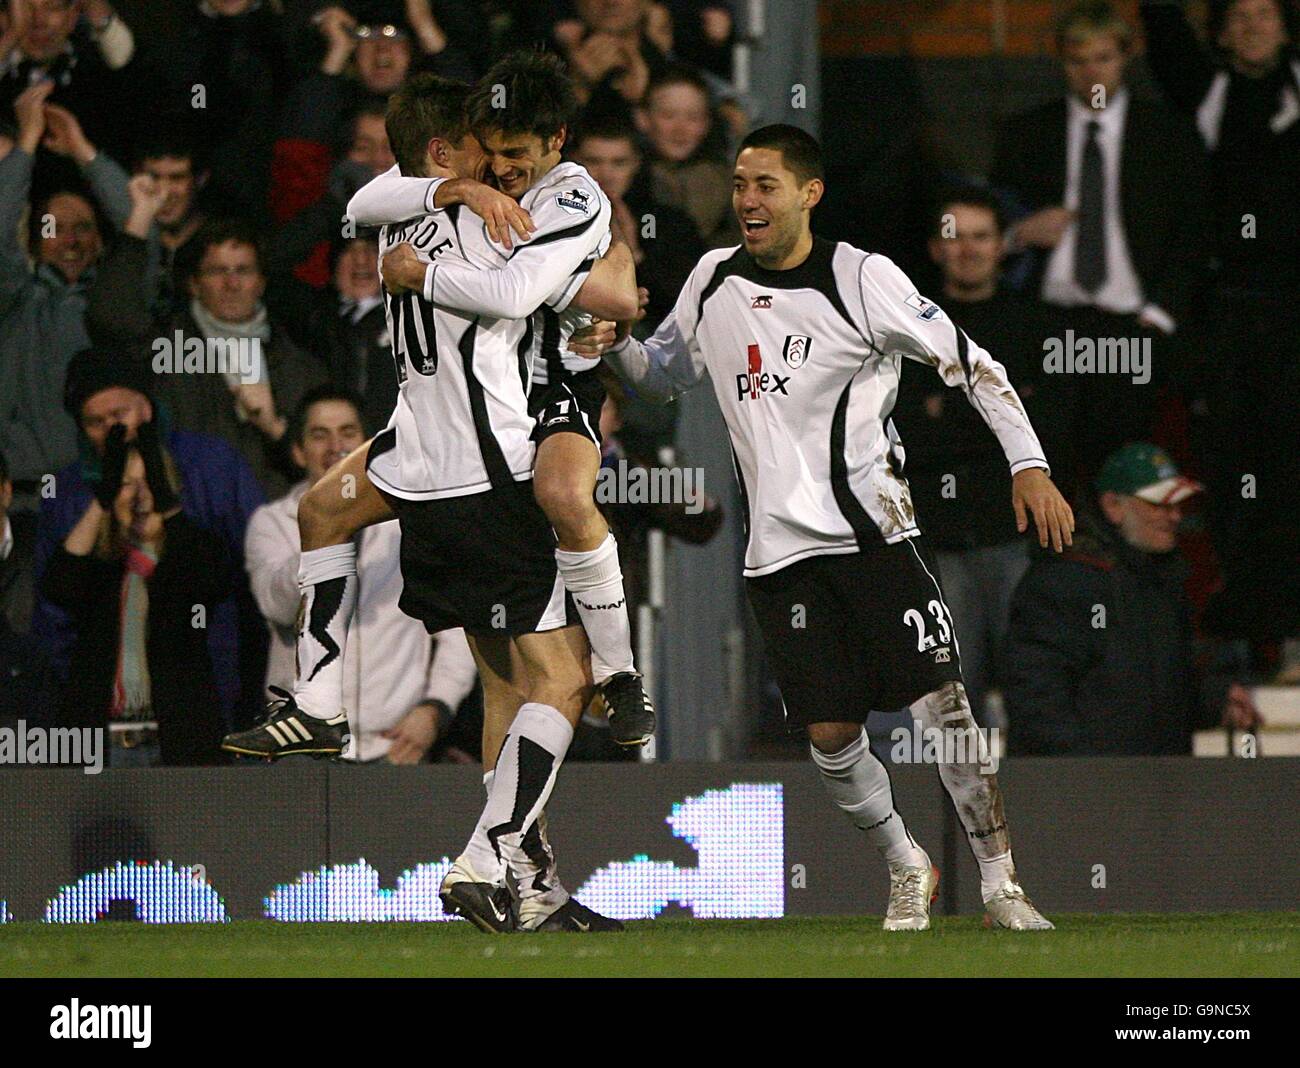 Fulham's Vincenzo Montella (center) celebrates with team mates Clint Dempsey (right) and Brian McBride after scoring the first goal of the match Stock Photo